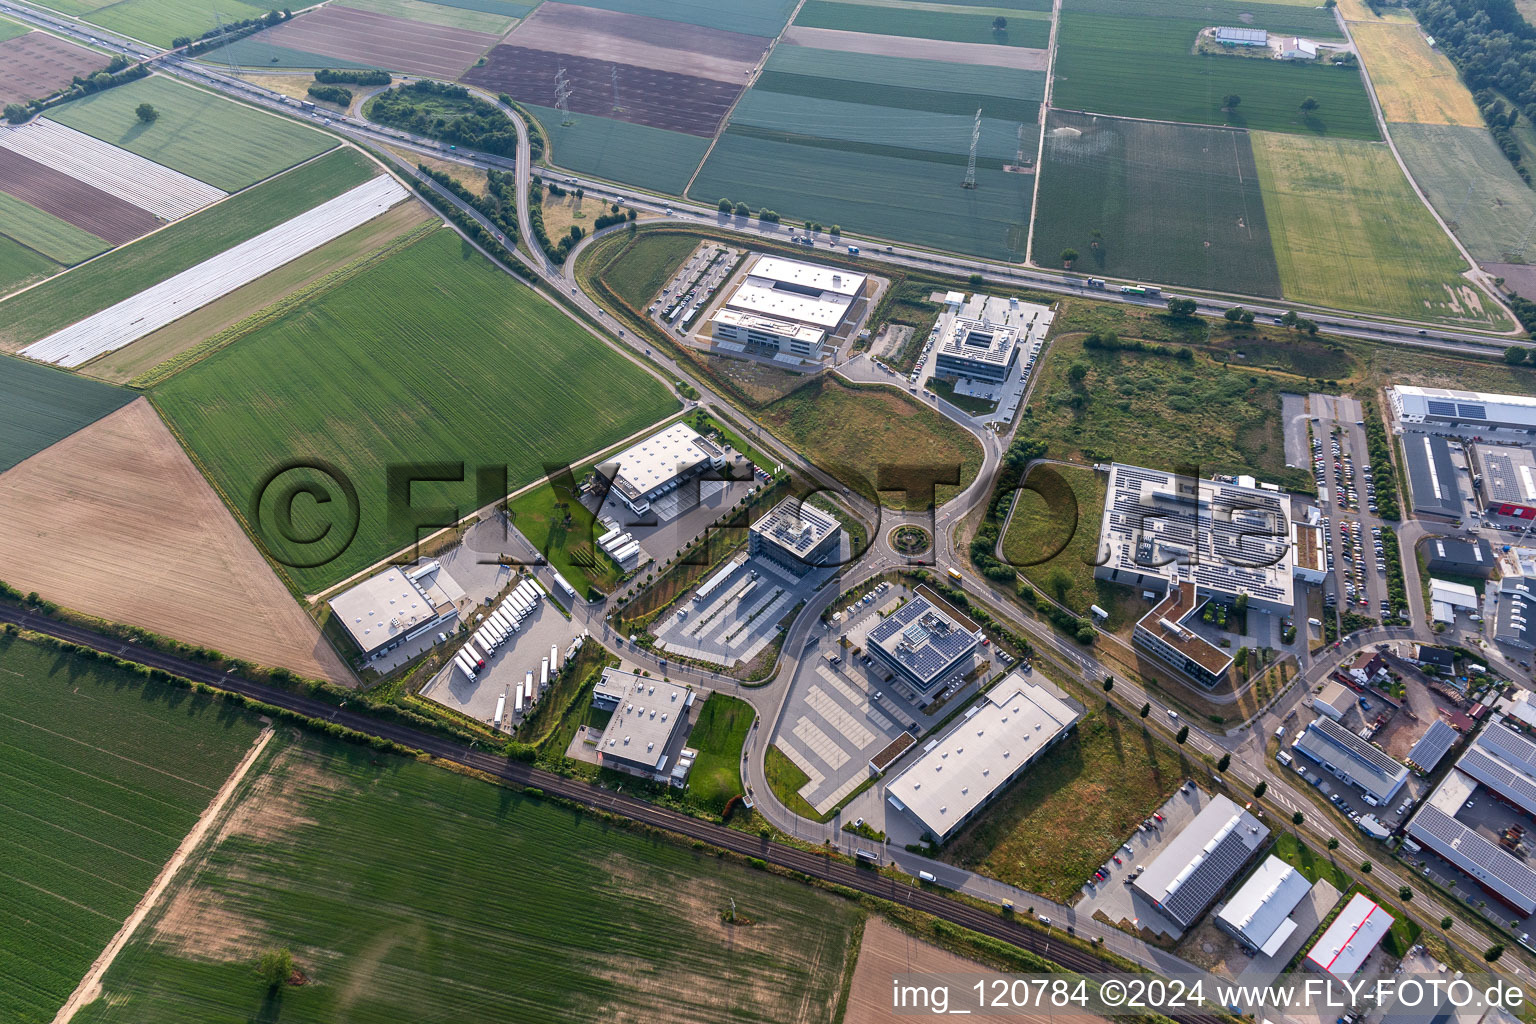 Industrial and commercial area Nord with ITK Engineering GmbH, DBK David + Baader, Transac und Fischer Fahrradmarke in Ruelzheim in the state Rhineland-Palatinate, Germany